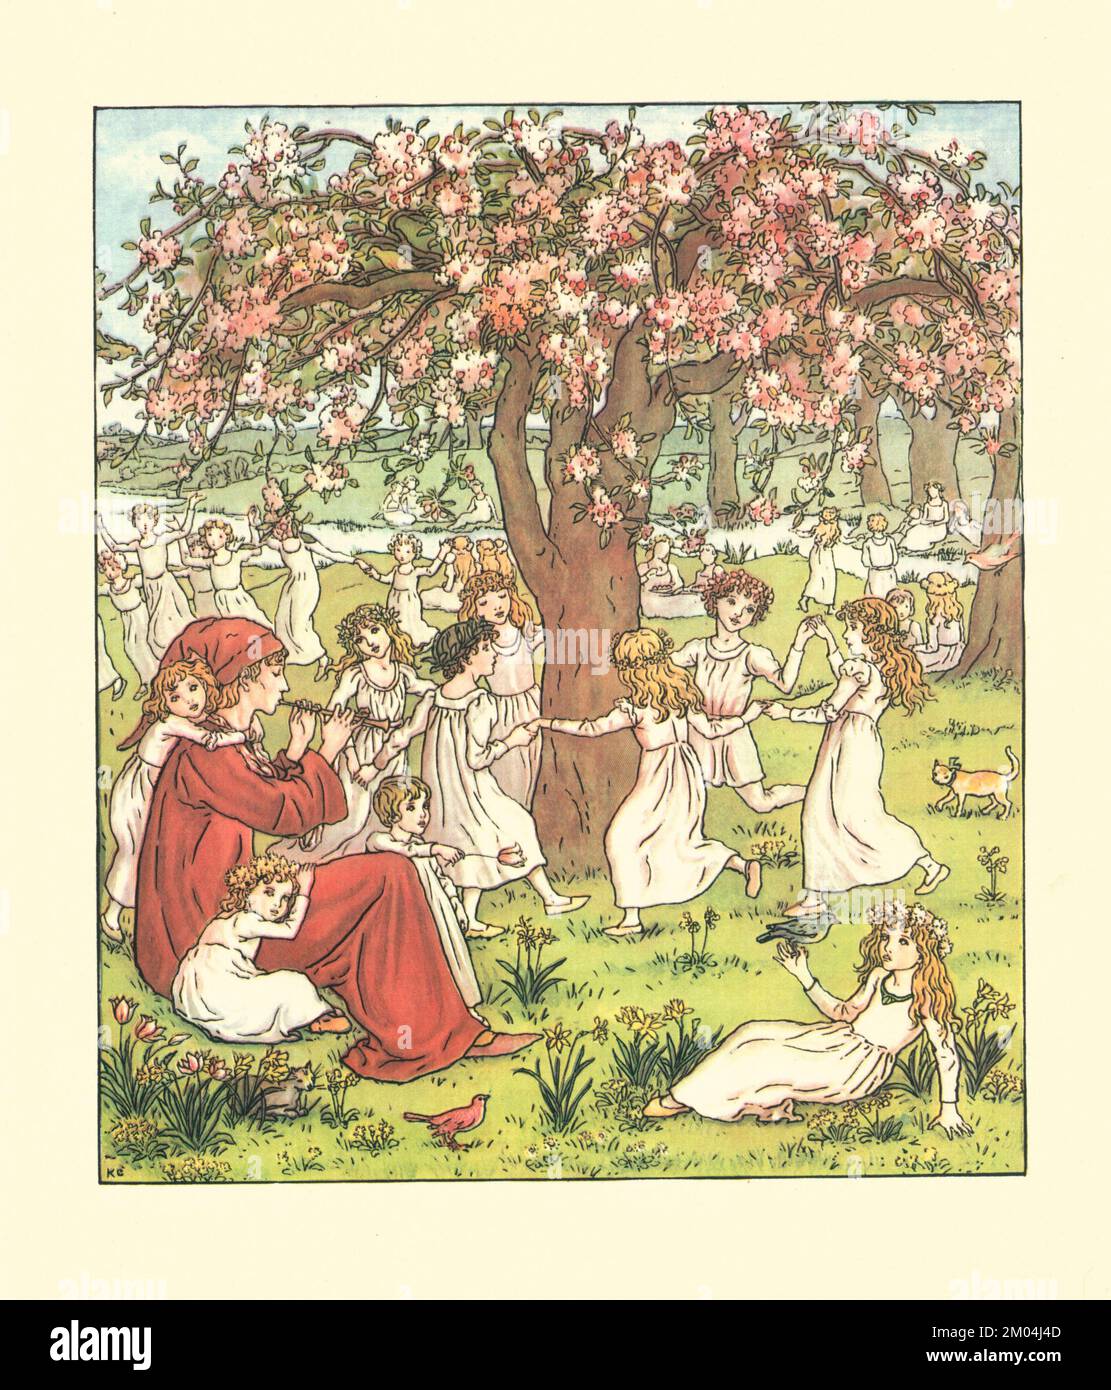 How Their Children were Stolen Away frontispiece Illustrated by KATE GREENAWAY (1846-1901) English artist and writer. for The Pied Piper of Hamelin by Robert Browning, 1812-1889 Published by Warne in 1910 Stock Photo